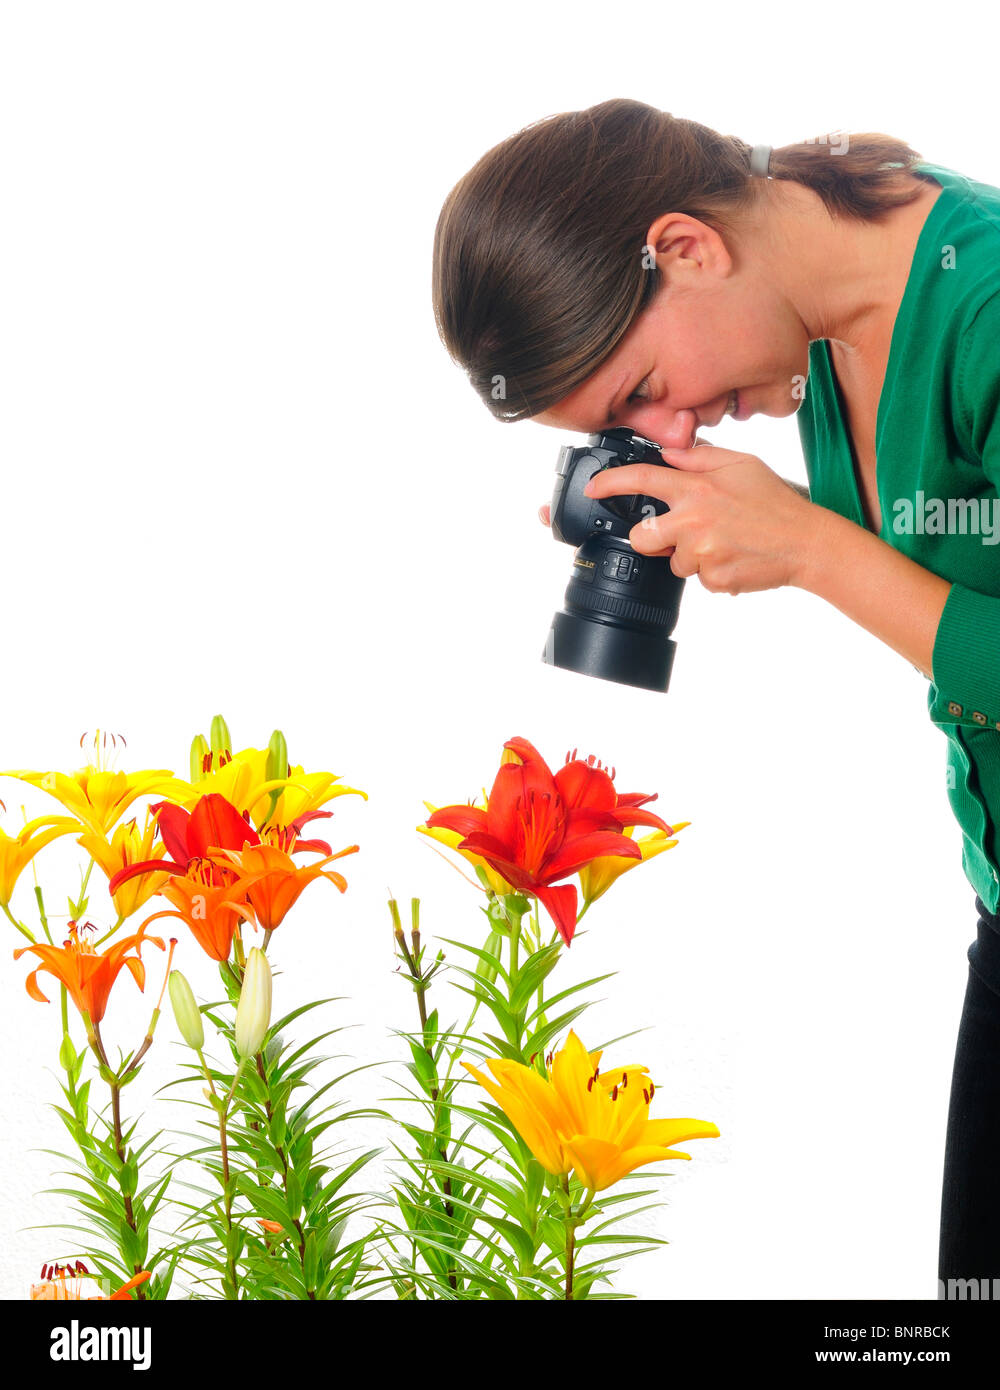 A young woman taking close-up photographs of flowers, isolated on white. Space for text. Stock Photo